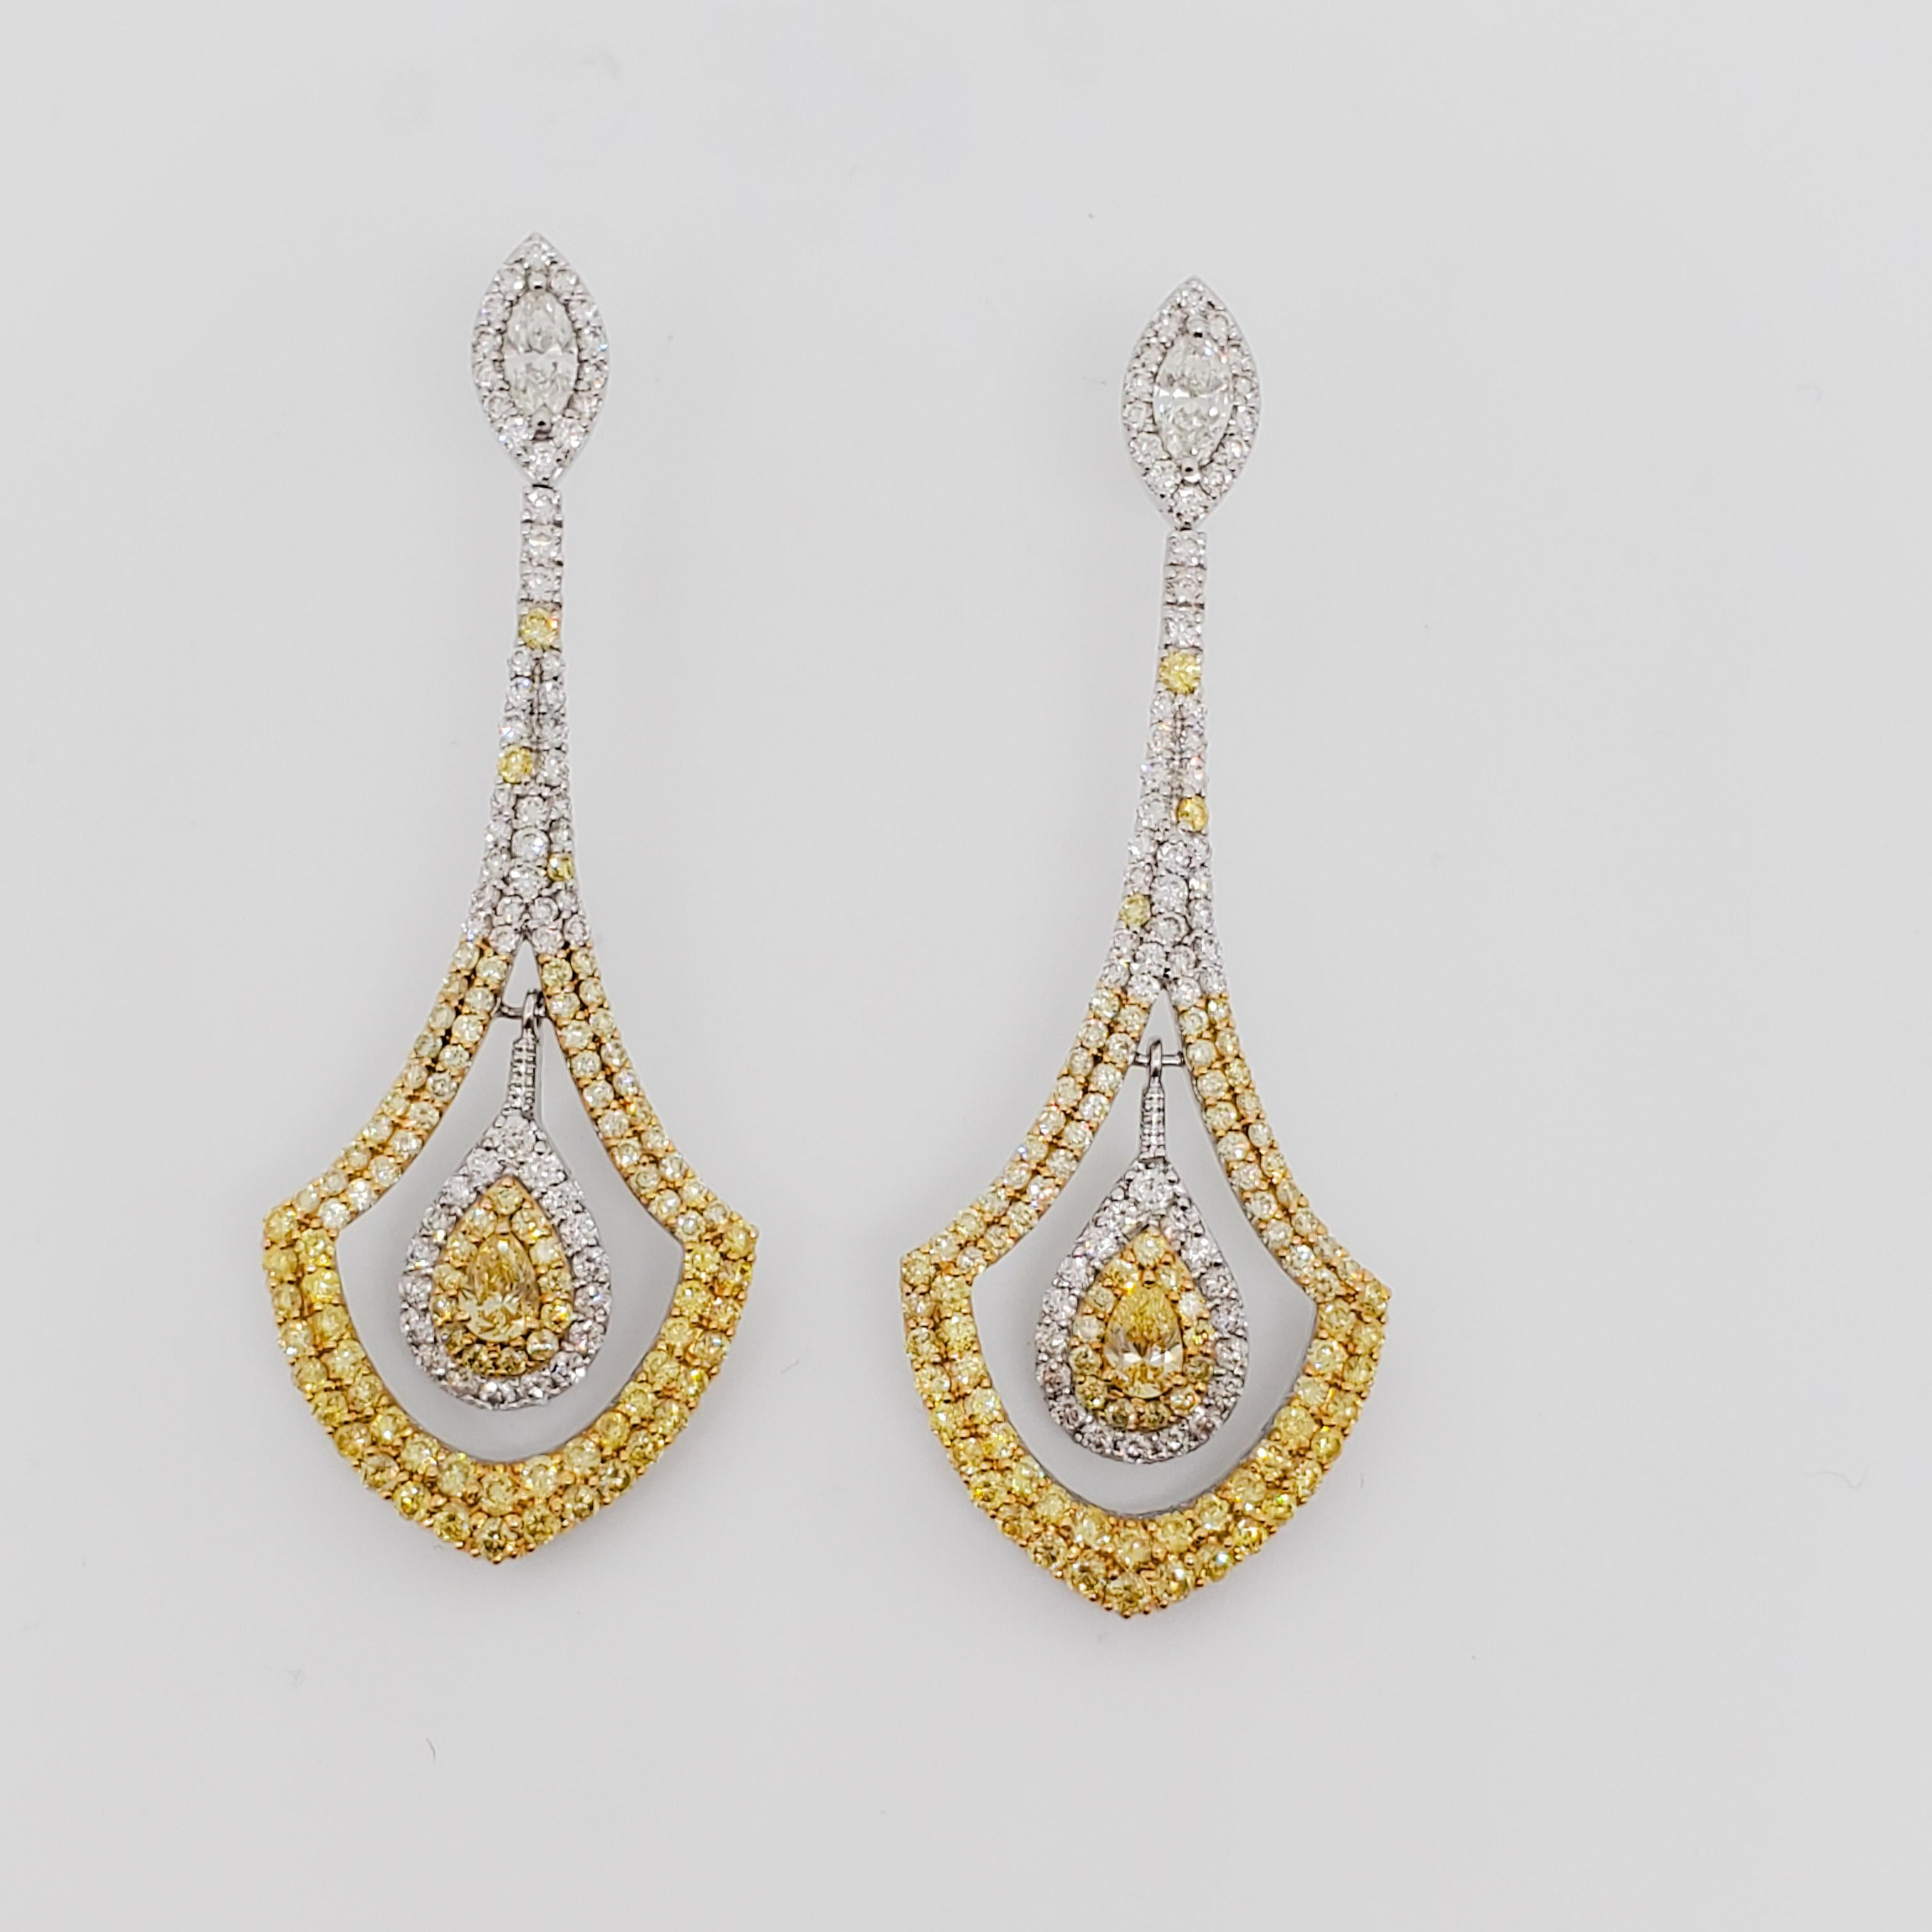 Gorgeous earrings with 2.64 ct. good quality white and yellow diamond marquise, ovals, and rounds.  Handmade in 18k white gold.  These are bright and beautifully made.